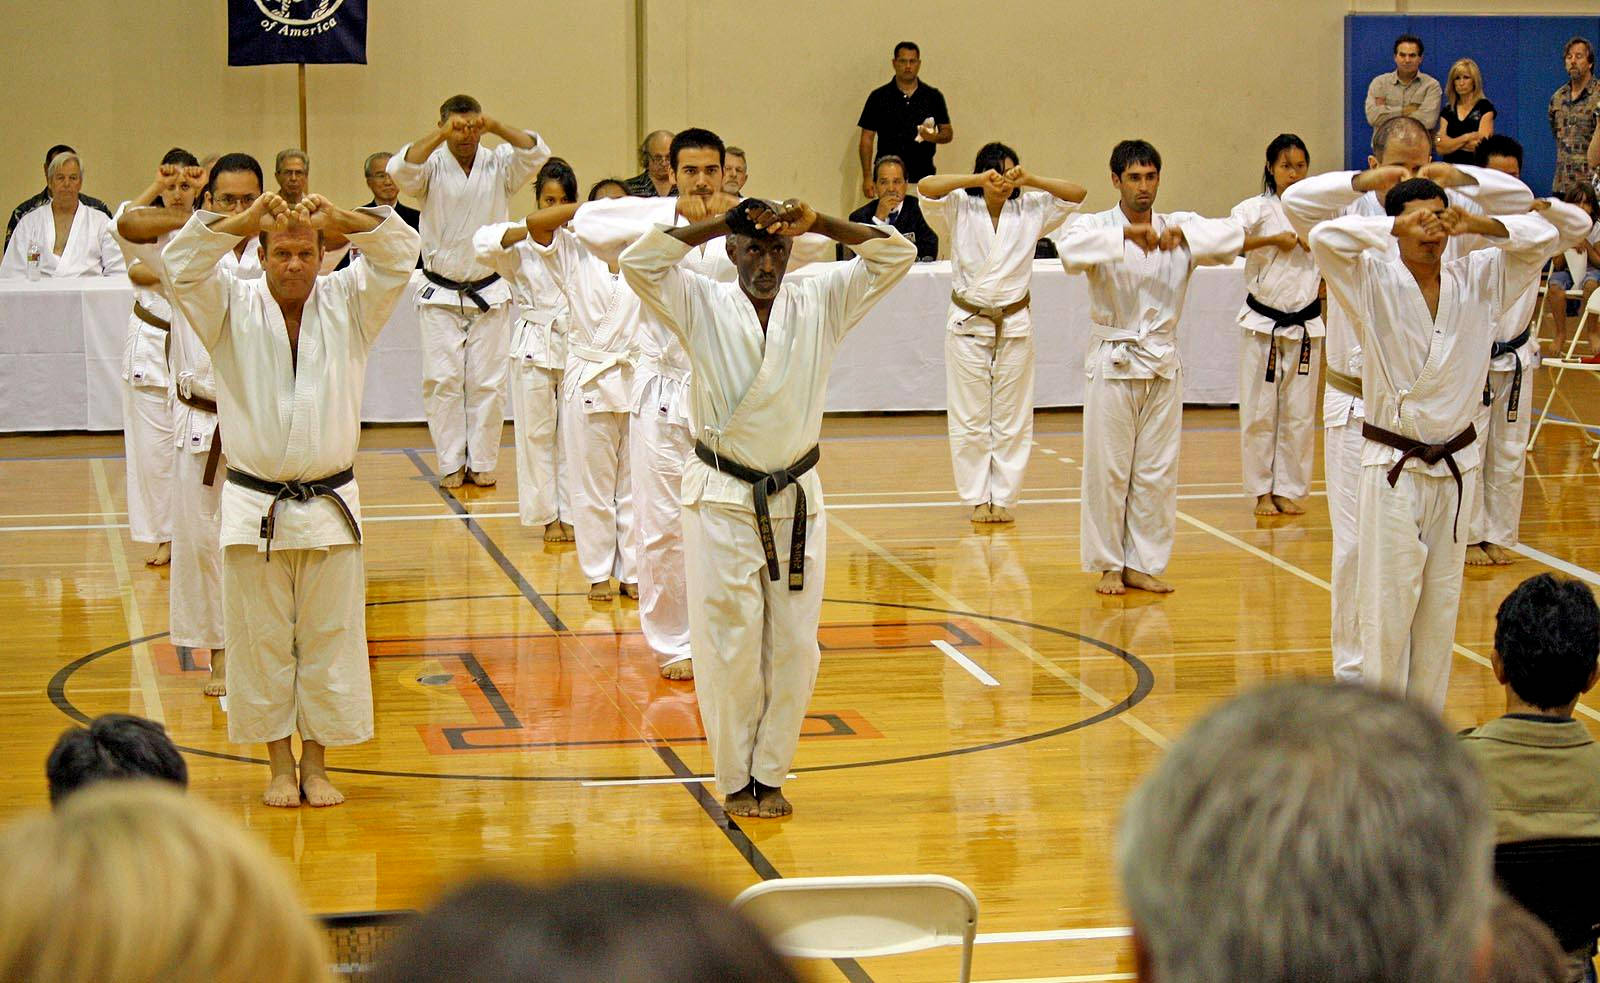 Karate Students In Class At Basketball Court Wallpaper